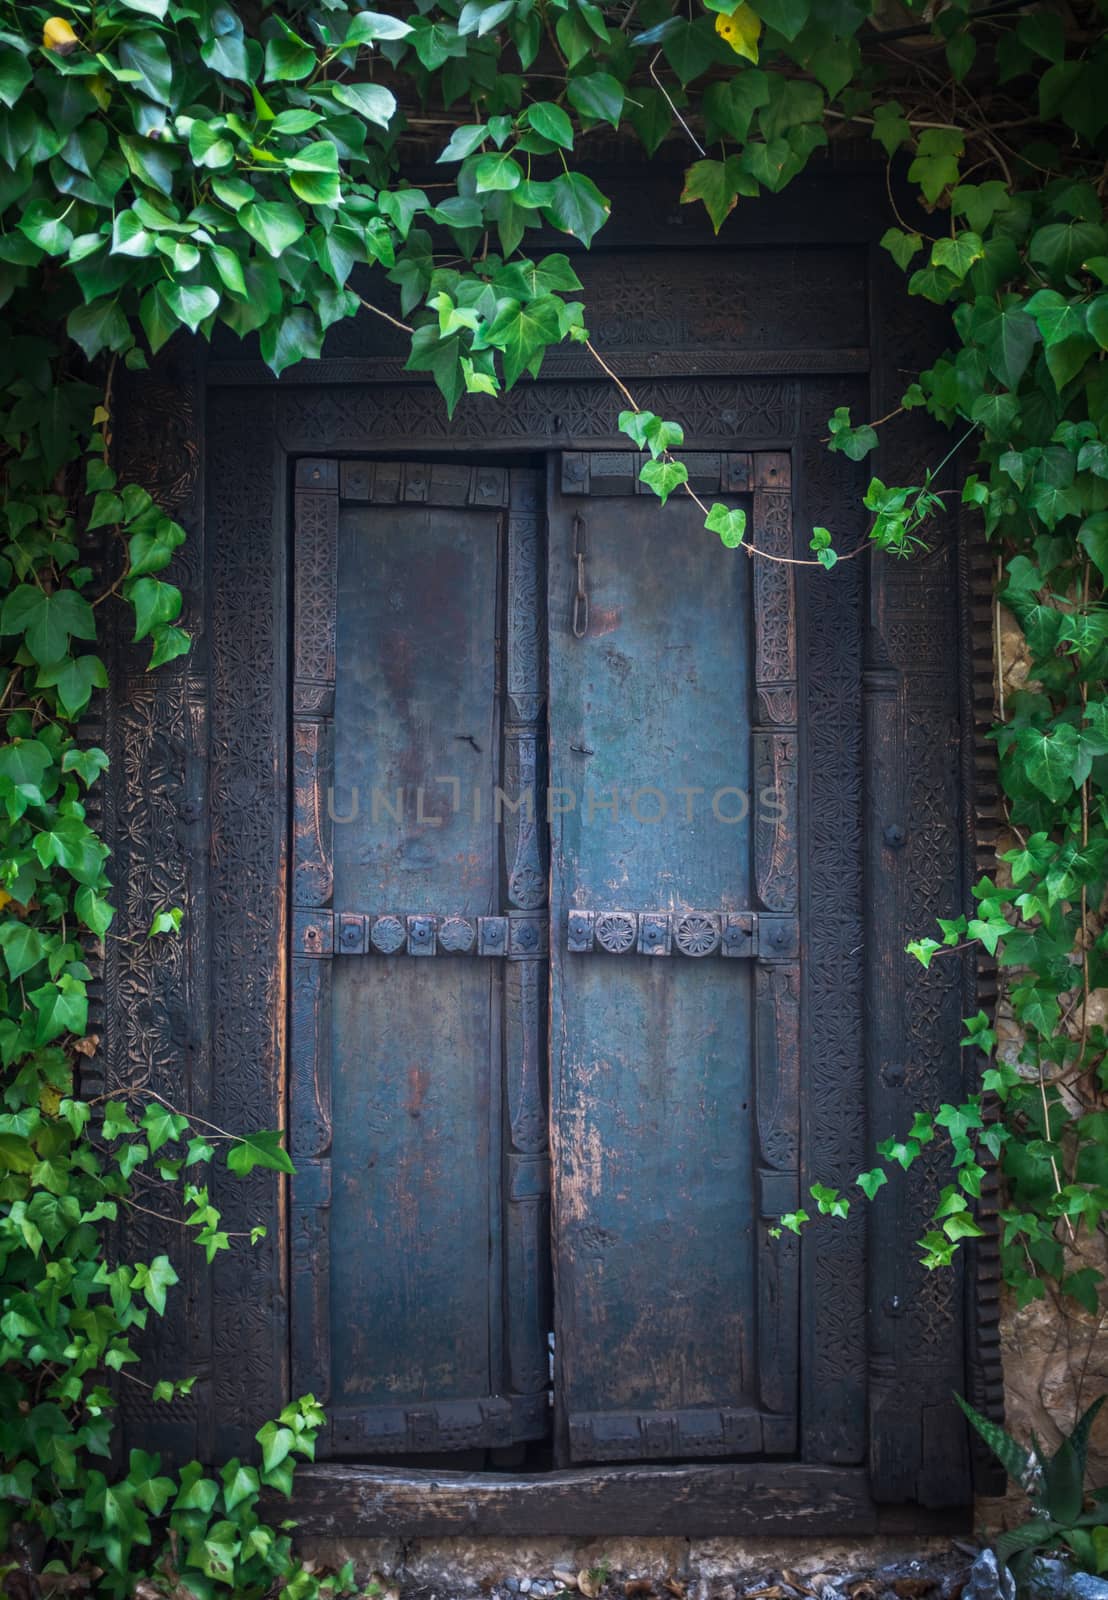 Ivy Surrounding An Old Wooden Door To A Secret Garden At An Old Mansion House